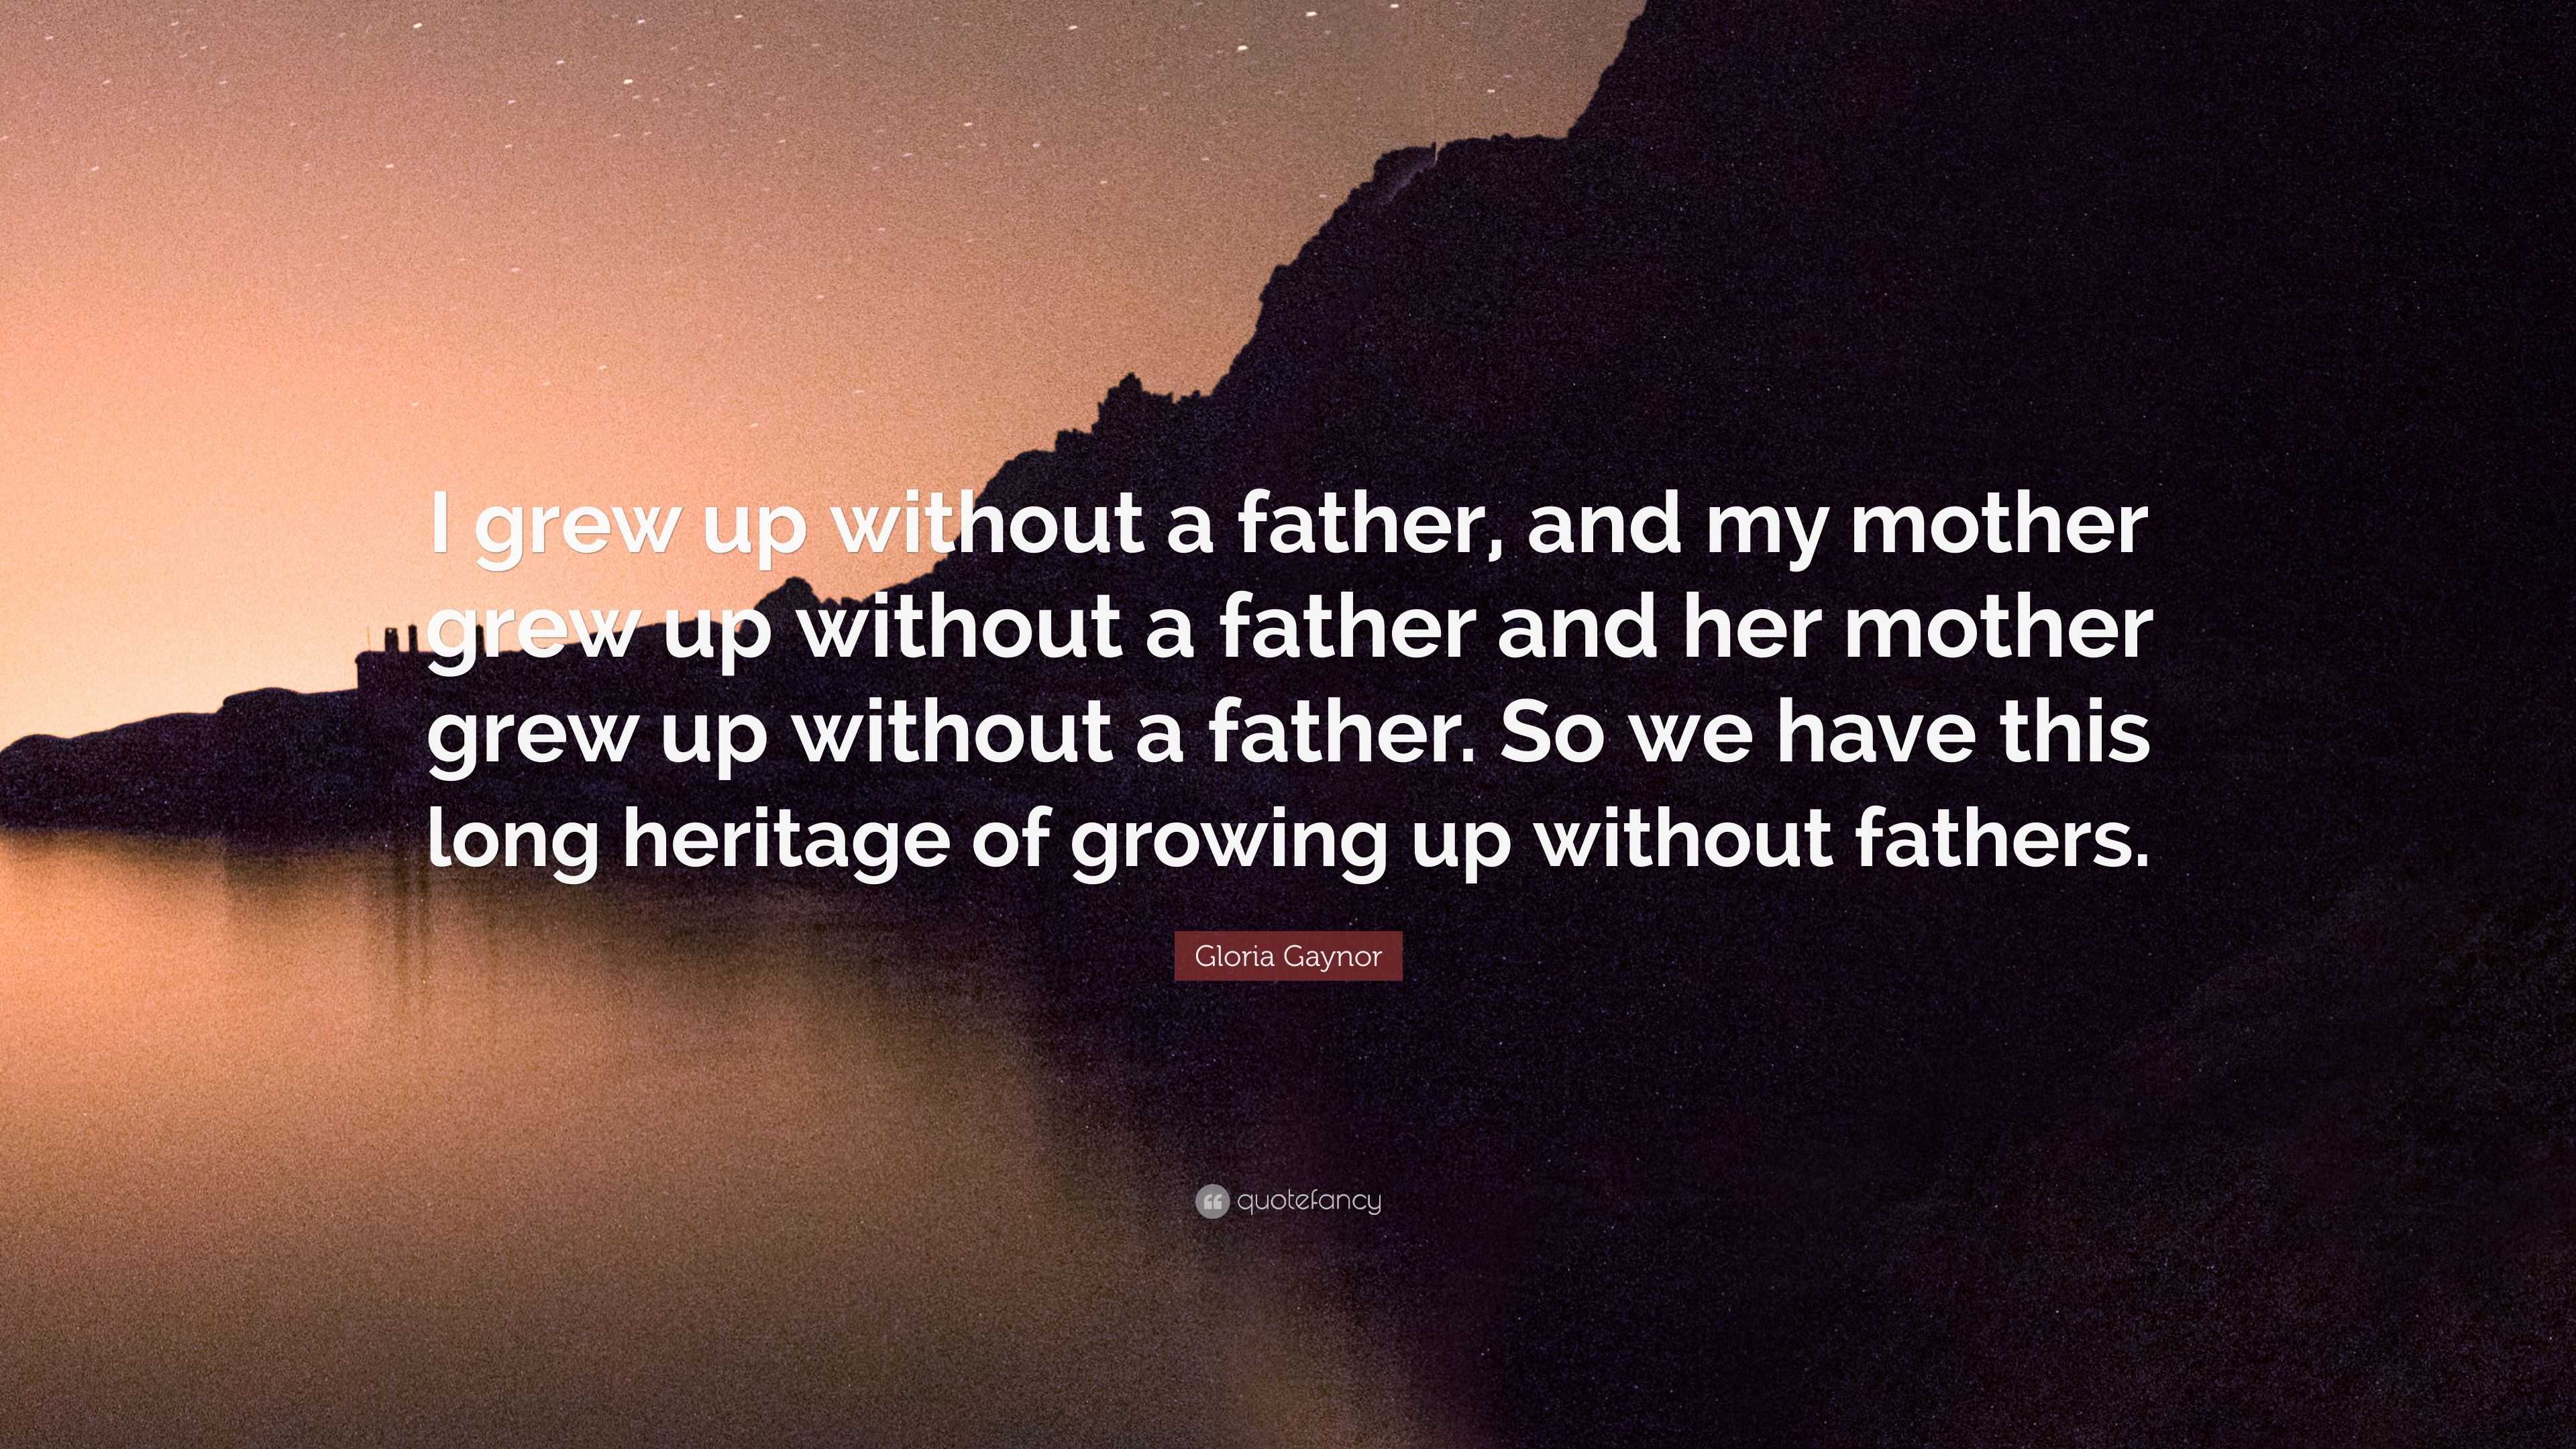 essay about growing up without a father